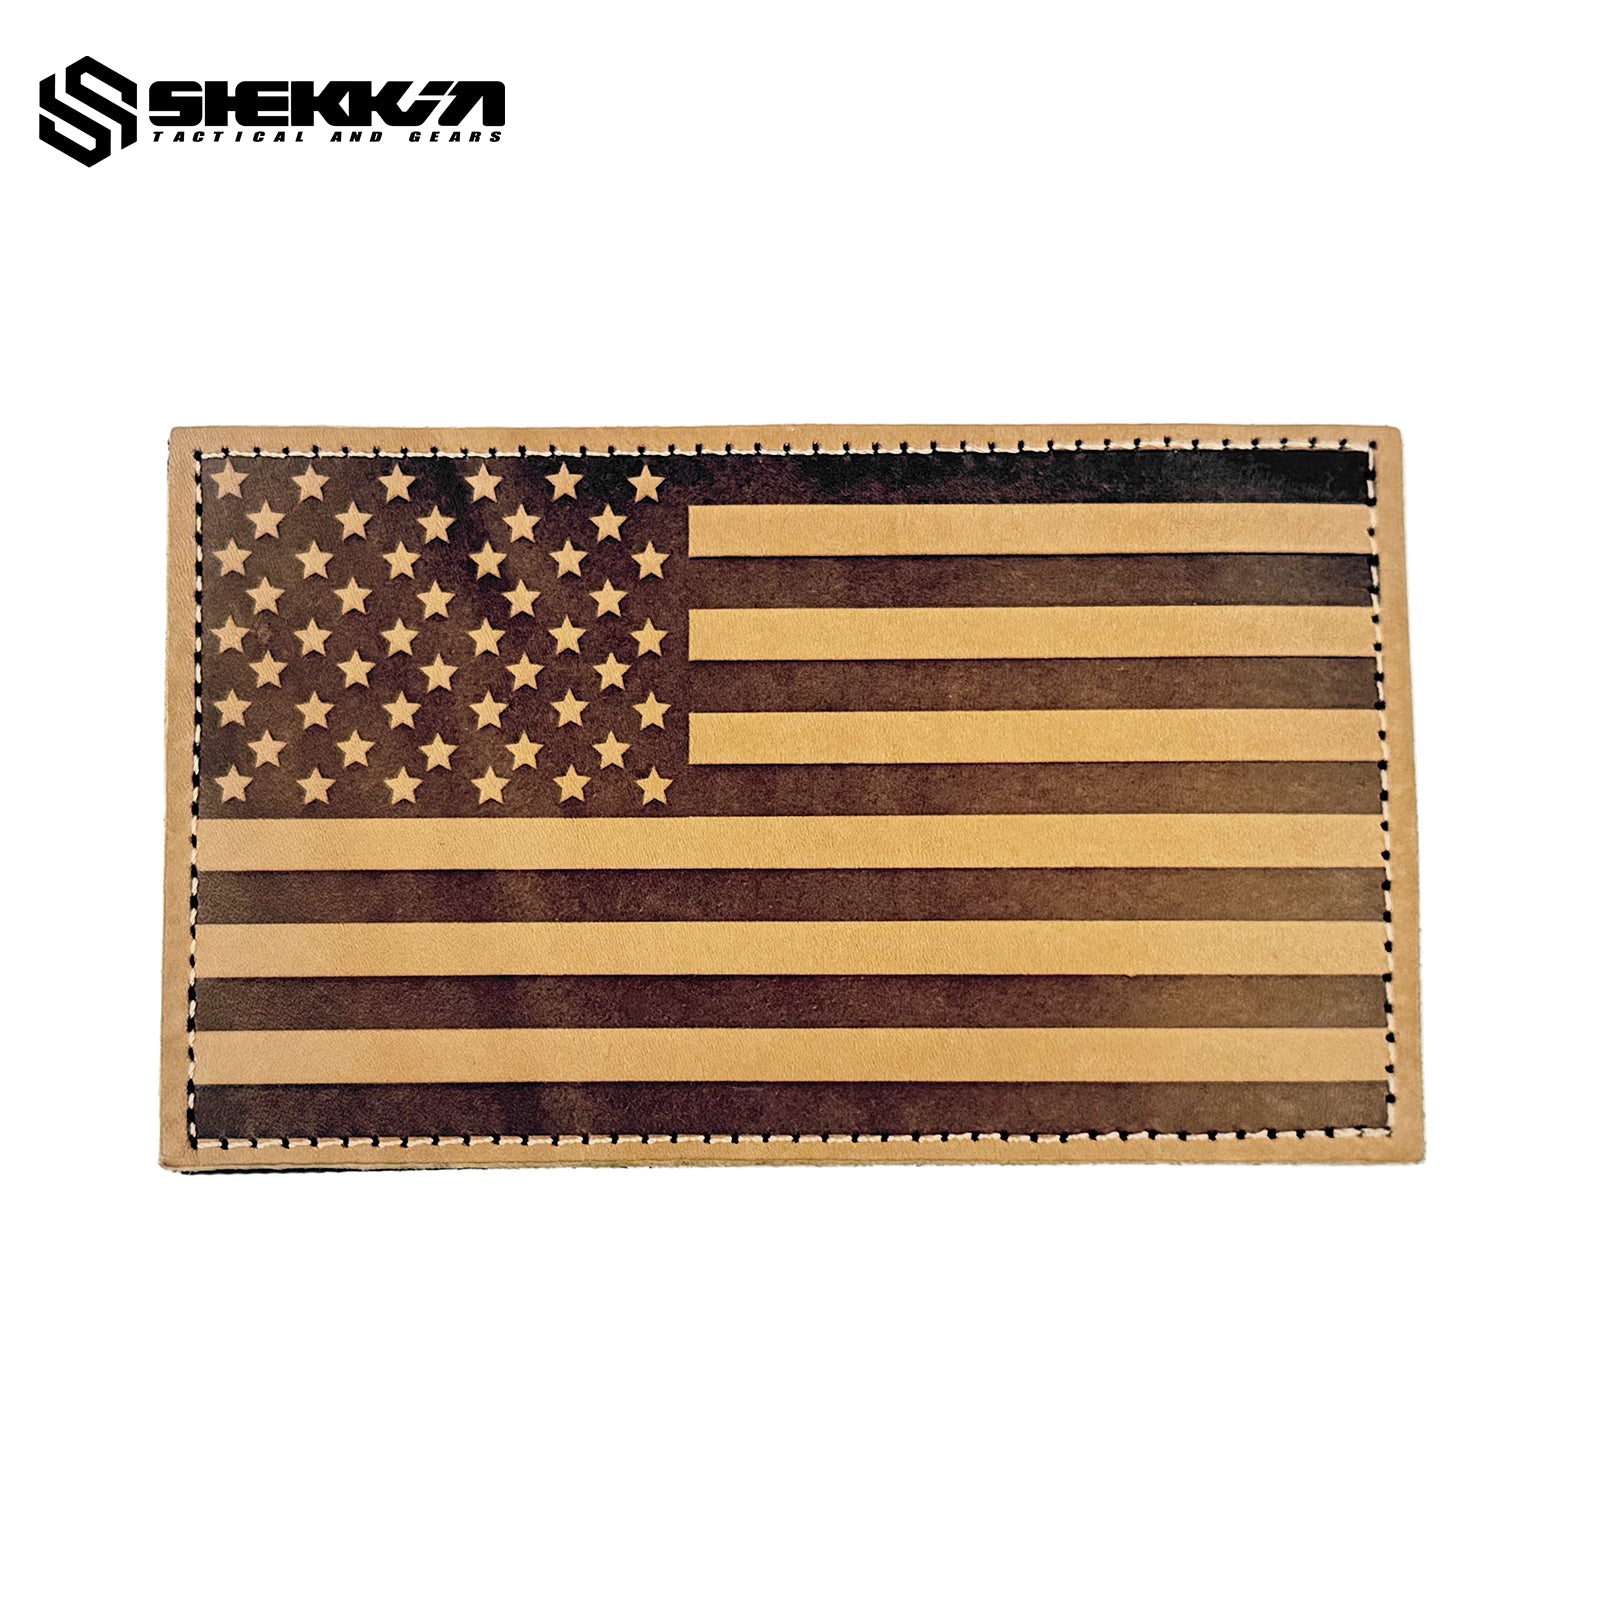 3”x5” Cowhide Leather US Flag Patch